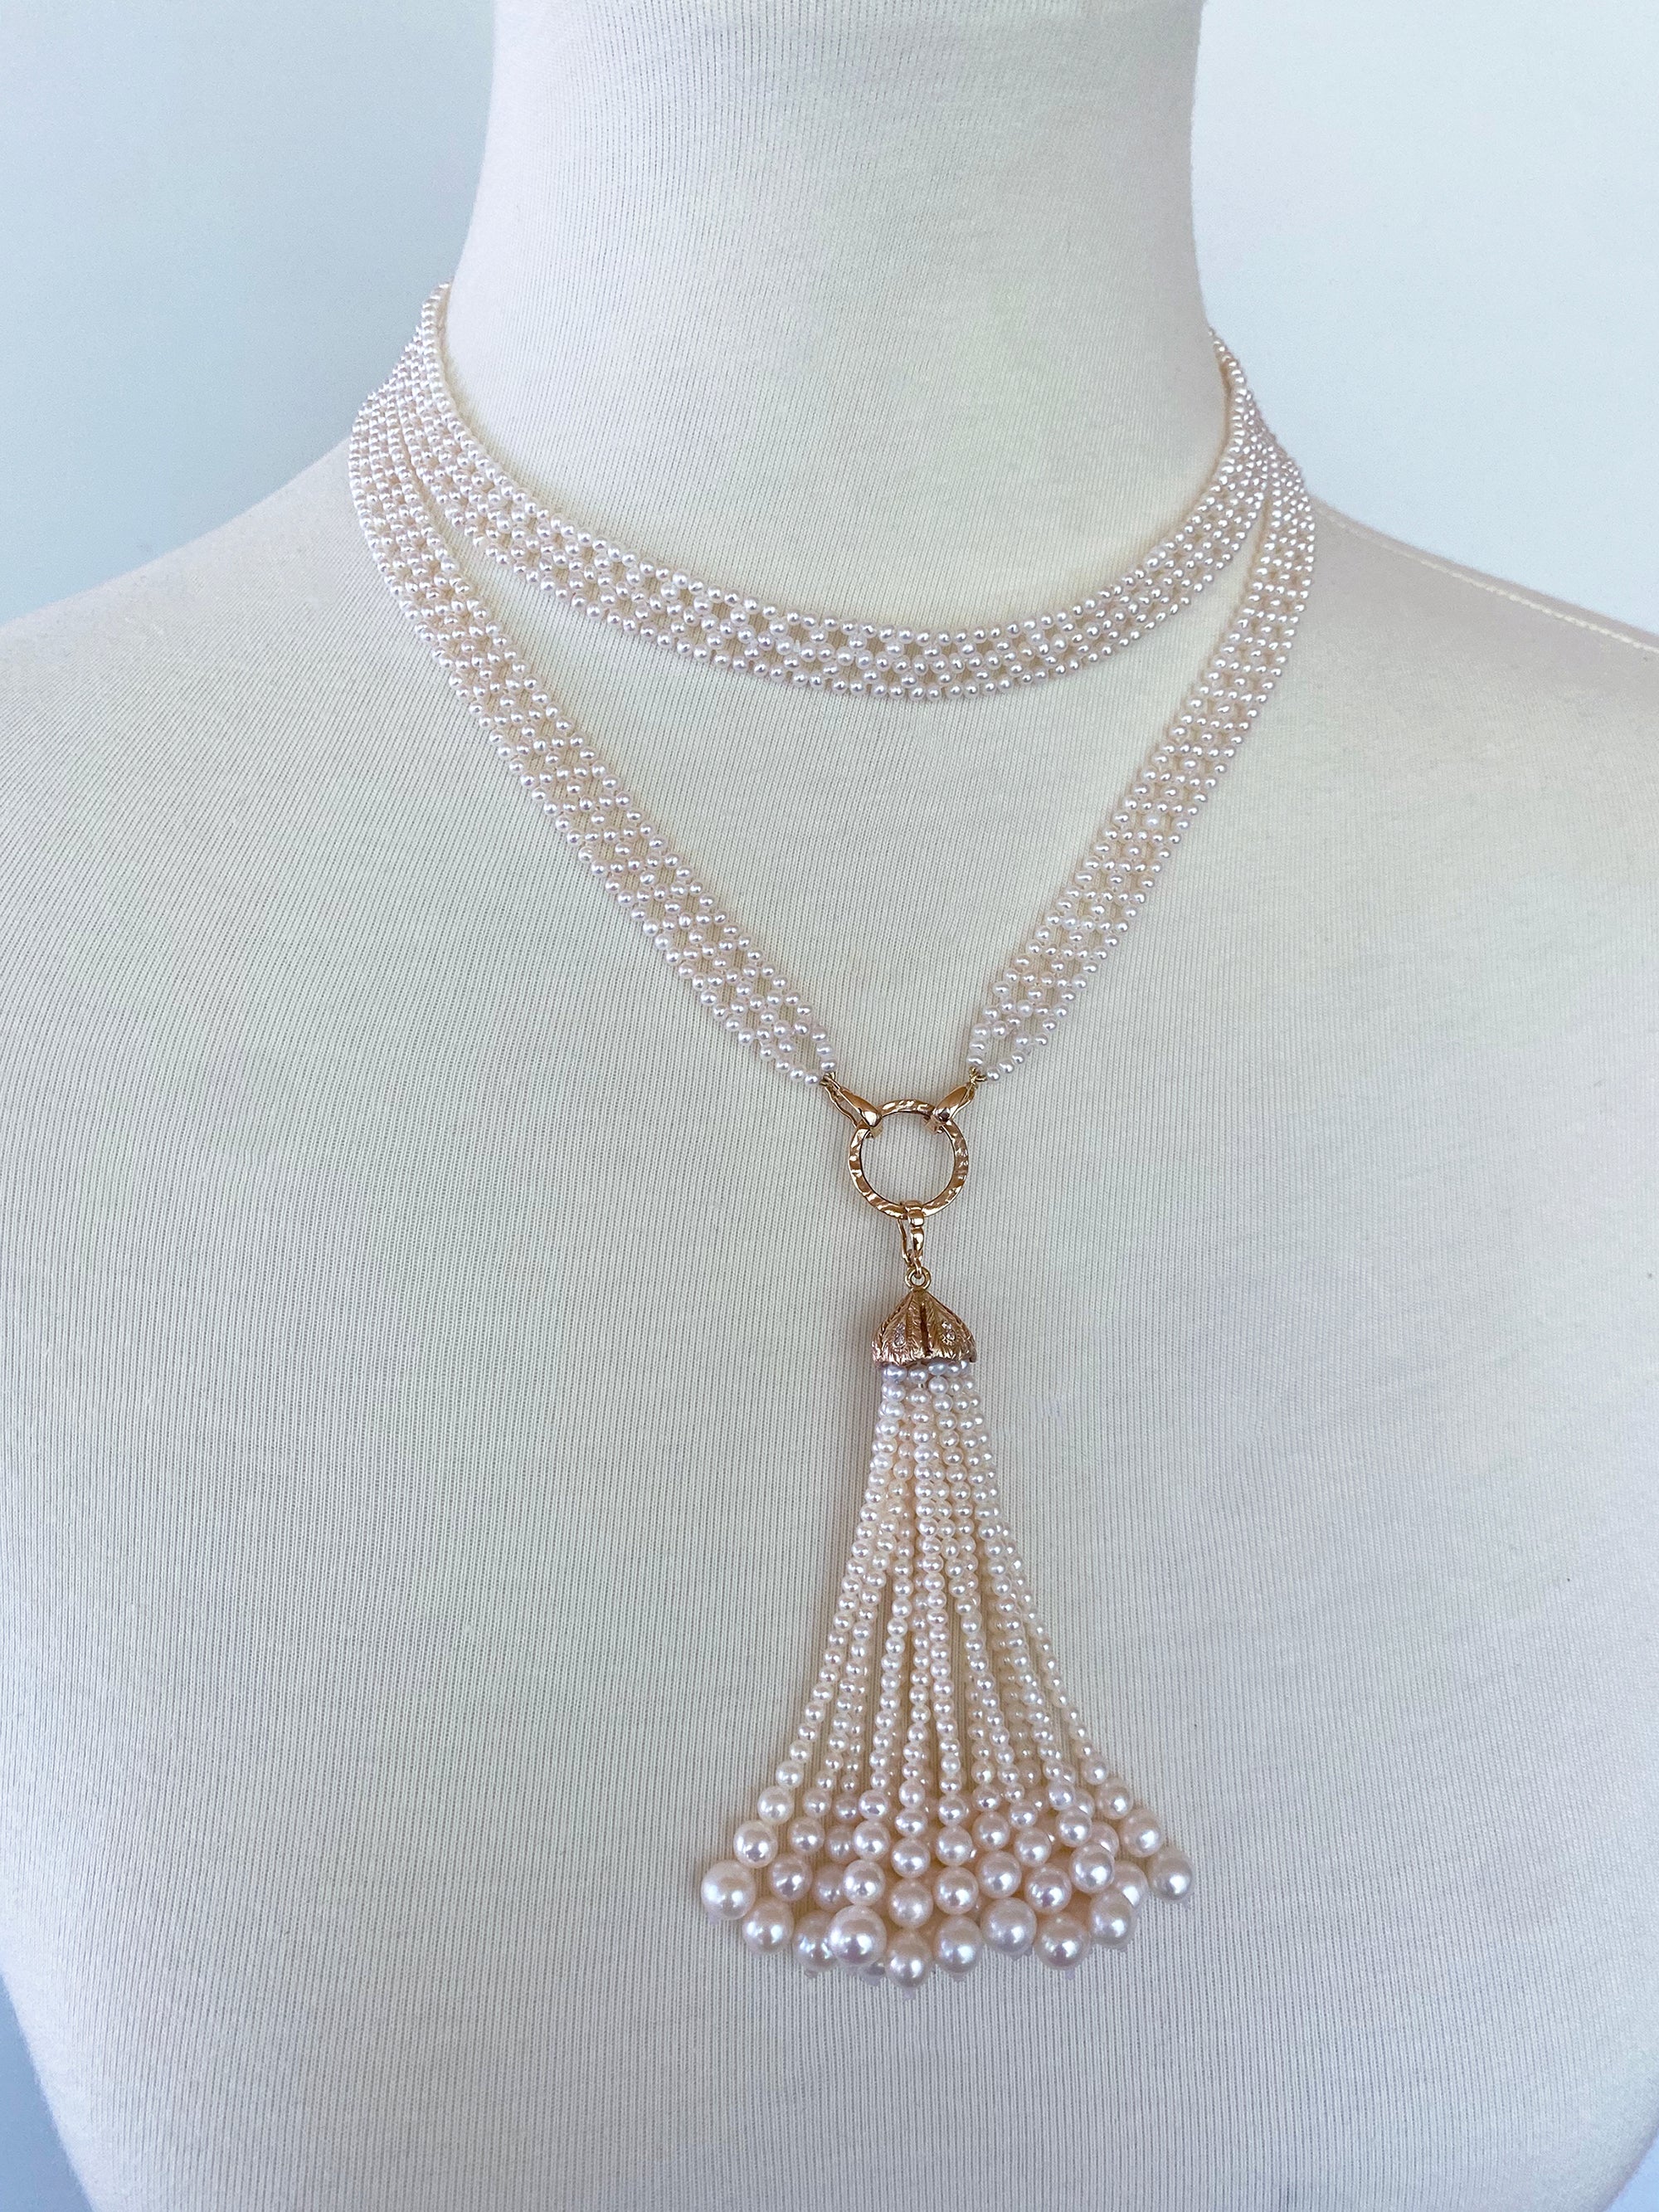 This dazzling woven pearl sautoir has an intricate rope like design with 2mm and 6mm pearls. A classic and timeless piece has a variety of wearable options at 48.5 inches long, including adding one's own brooches and family heirlooms. The tassel